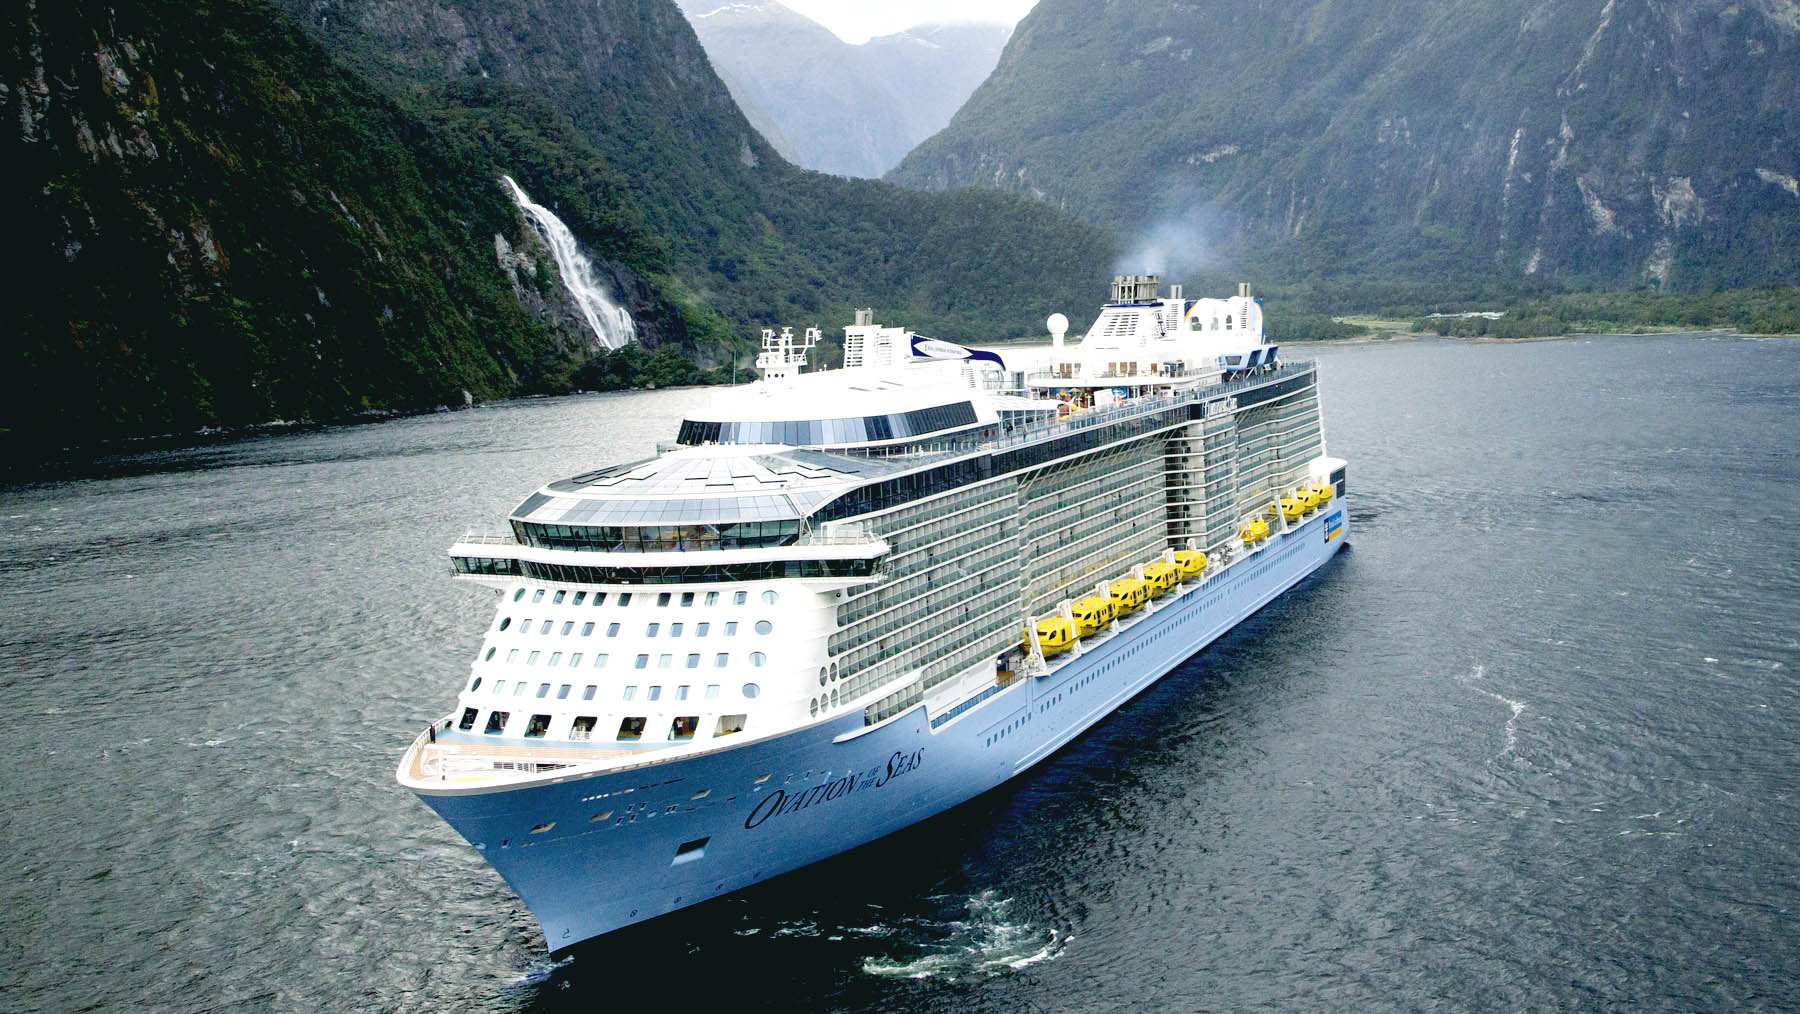 Ovation of the Seas sails through Milford Sound, New Zealand